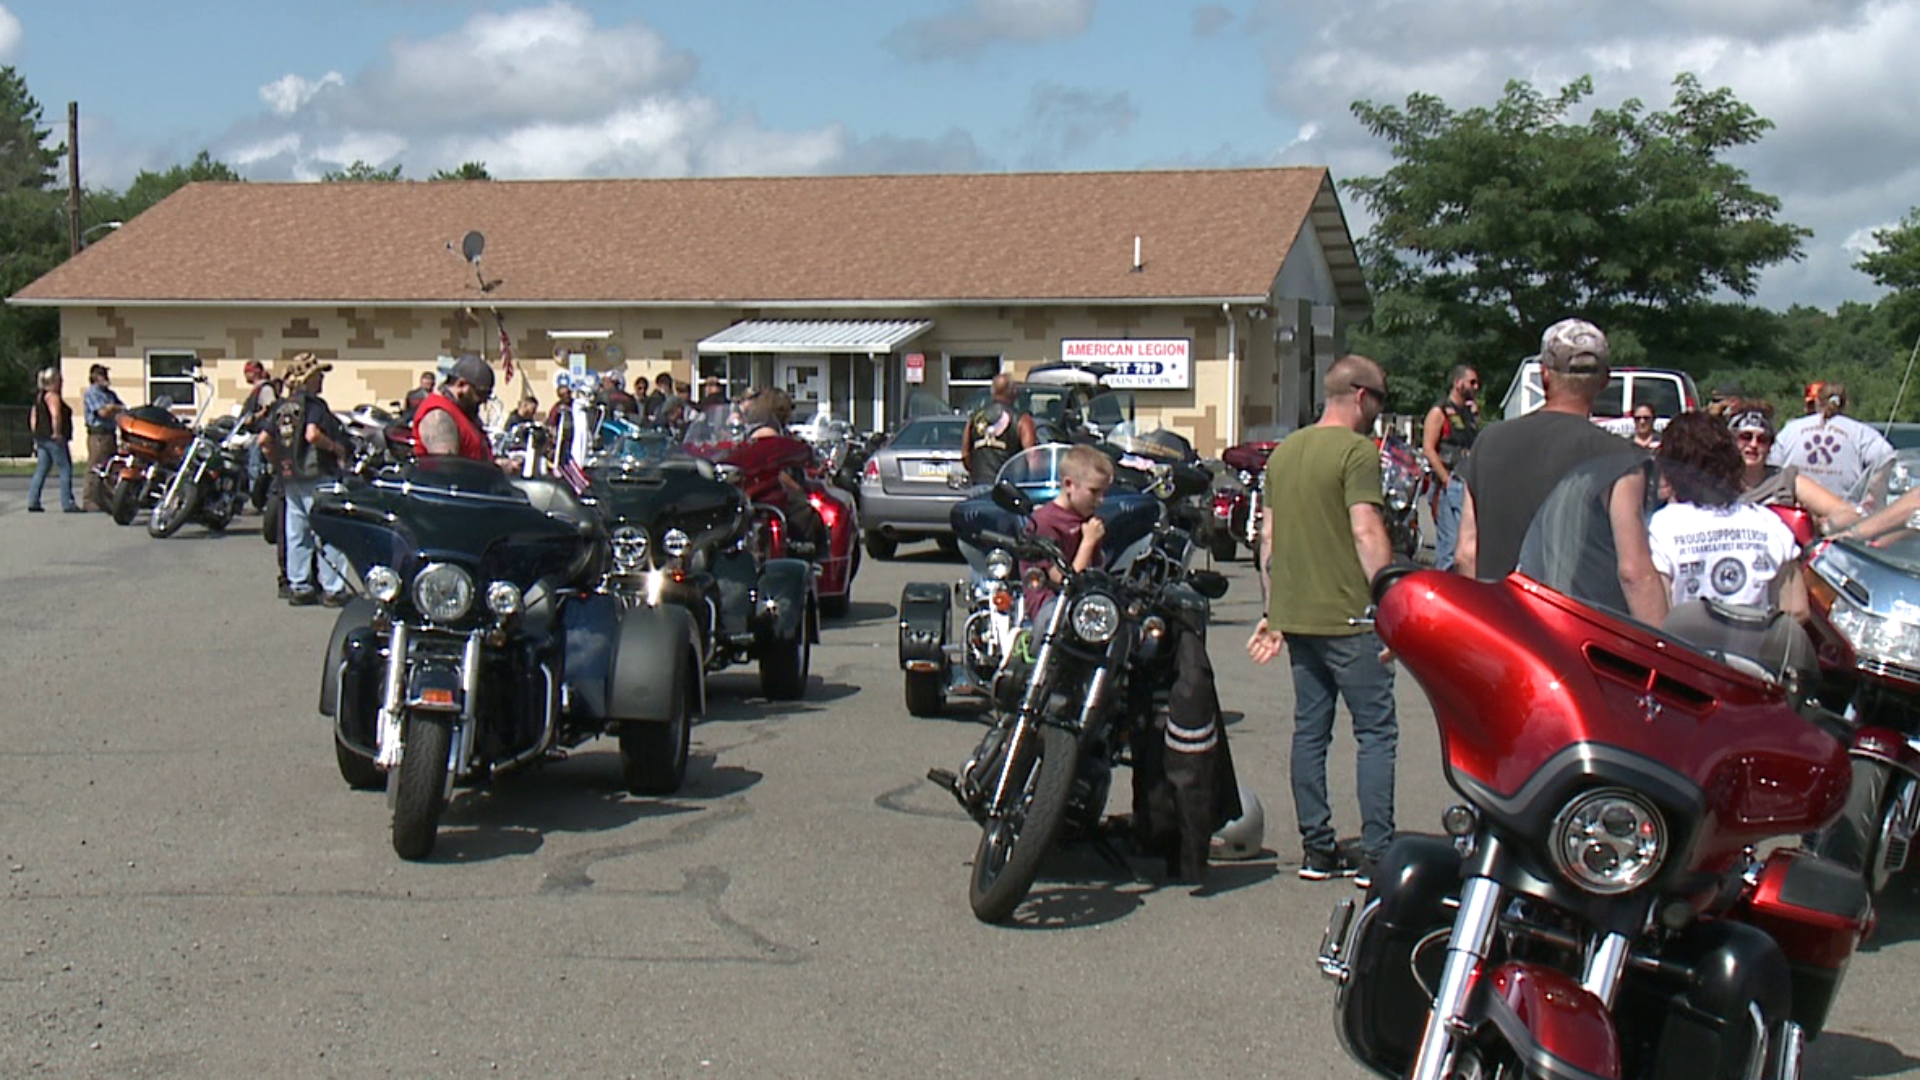 Motorcycles take to the open road to honor those who serve our country.